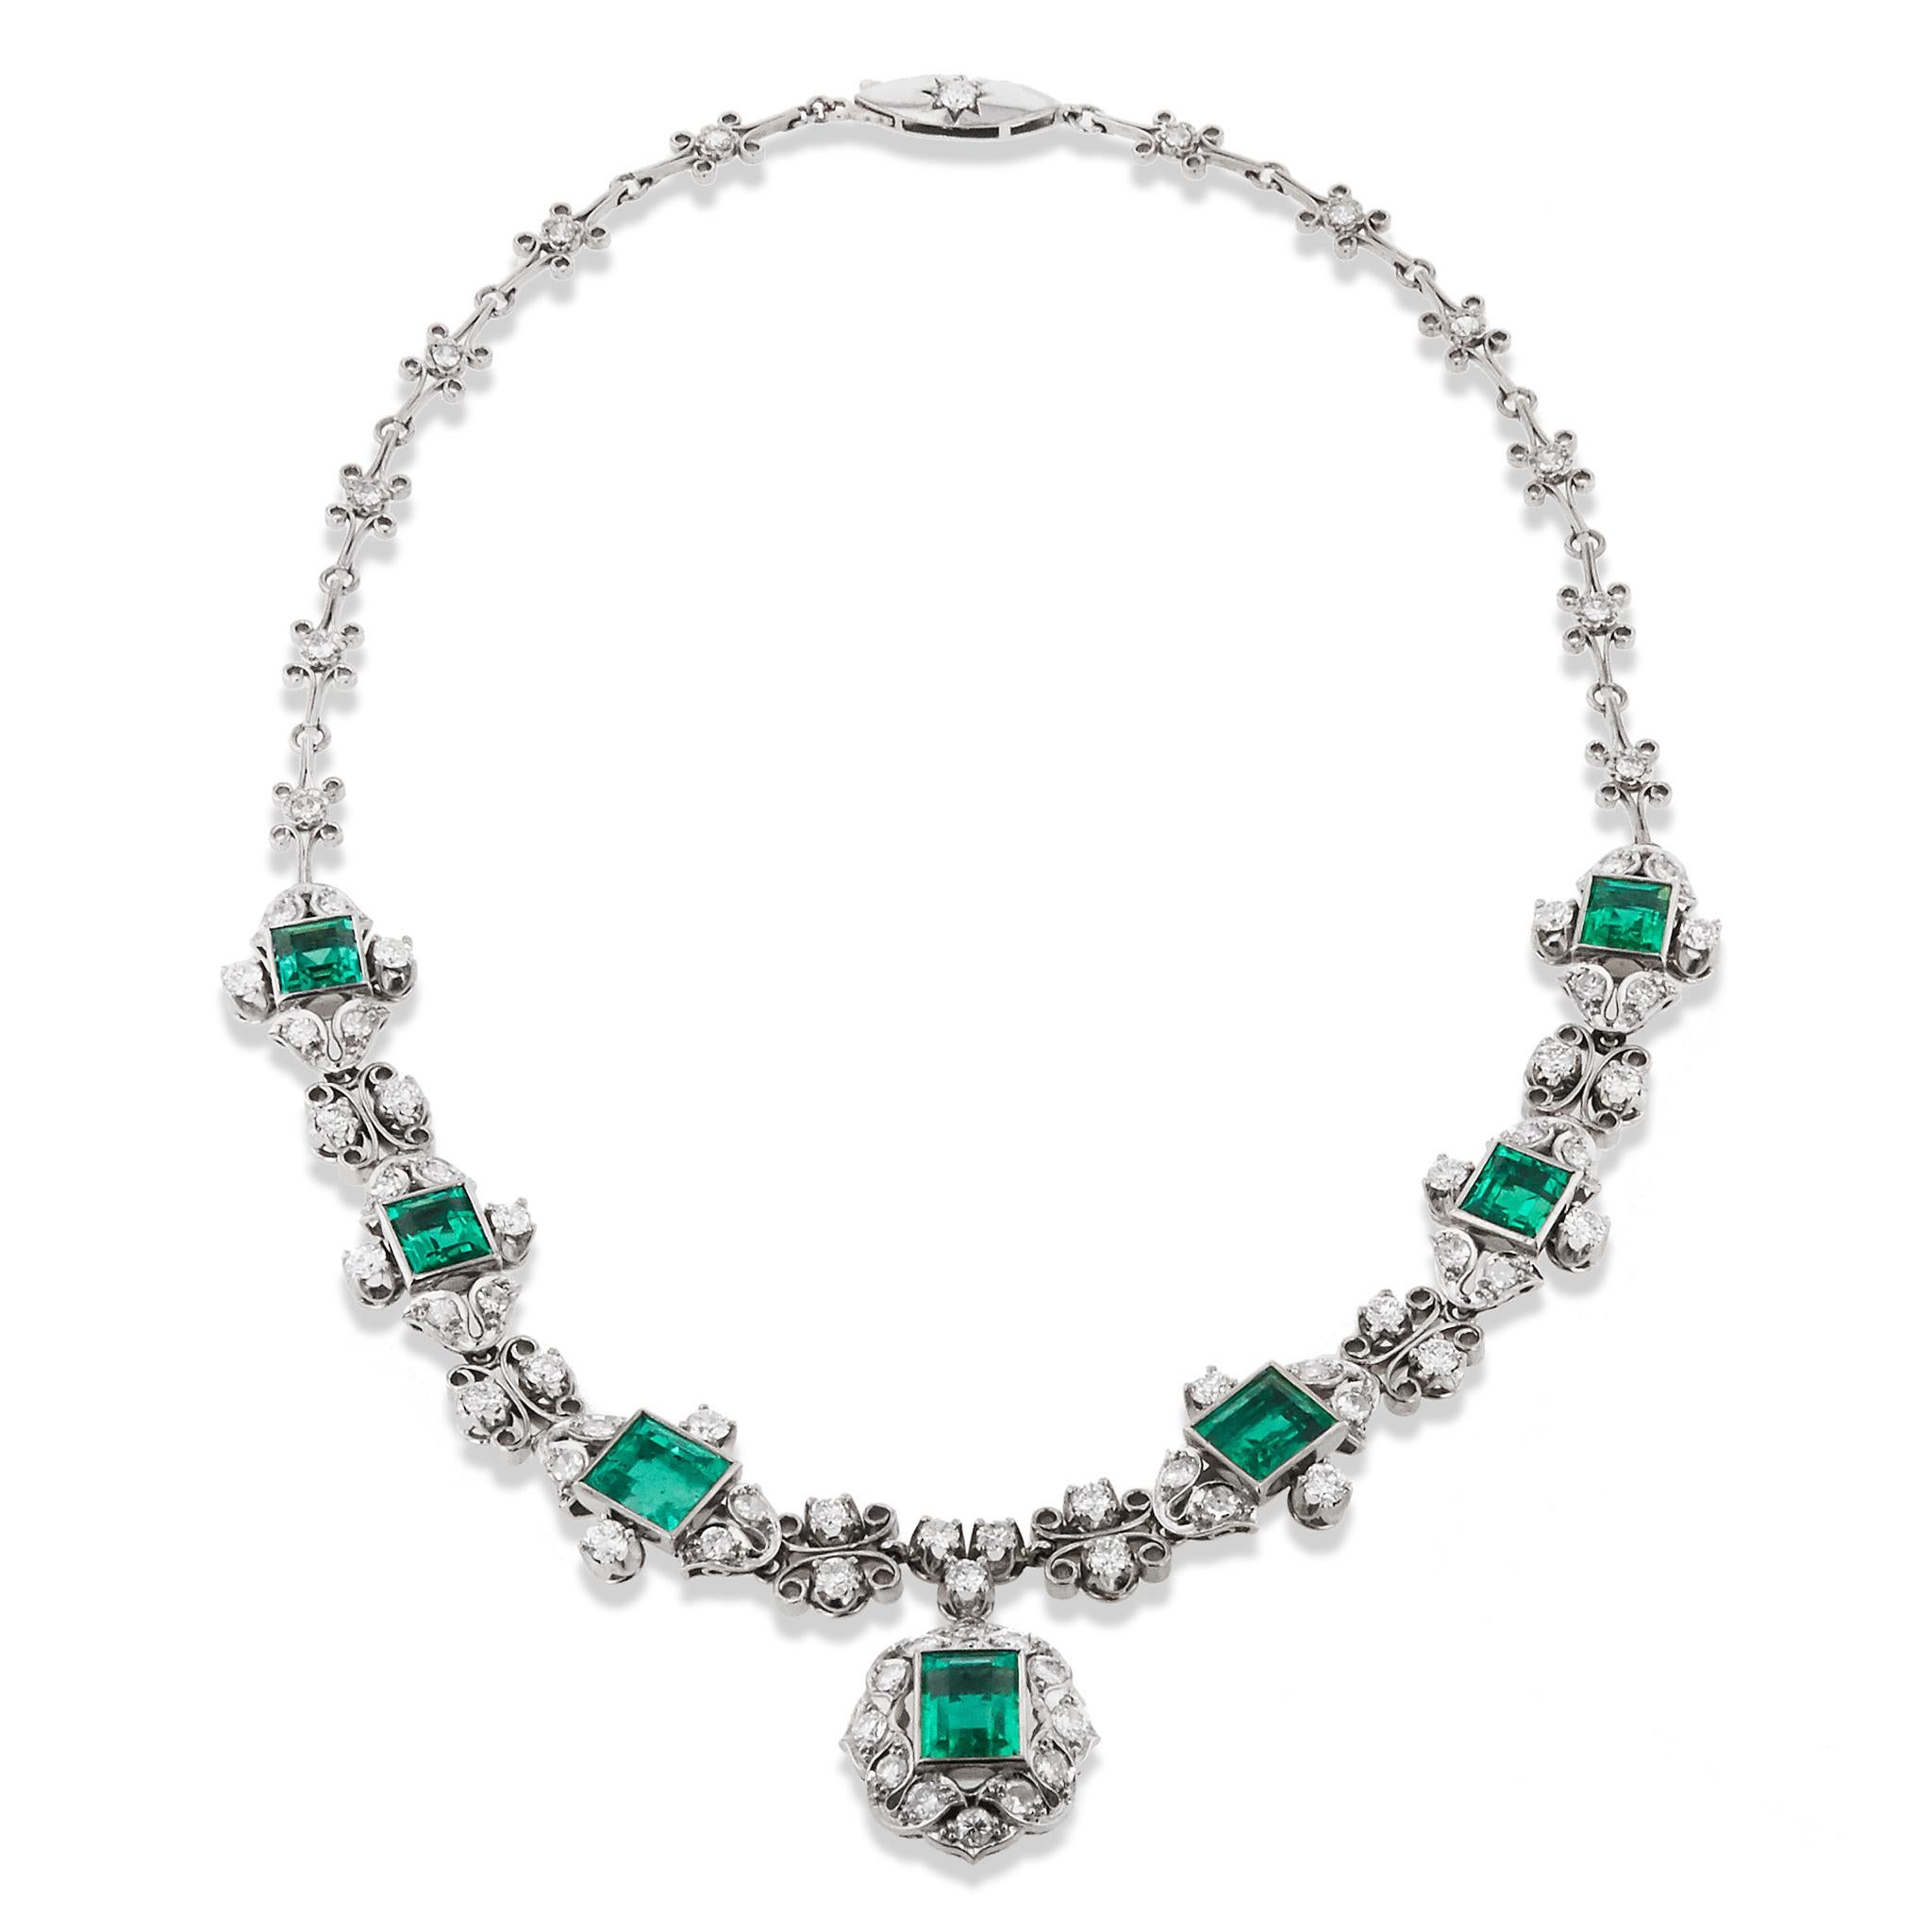 This Rare Circa 1950's necklace is a true classic, crafted from 18 karat gold and 15 karat palladium. 

Adorned with 15 total carats of natural, no oil, Emeralds and 5.50 Carats of European cut and single cut diamonds.

The GIA Certificates prove